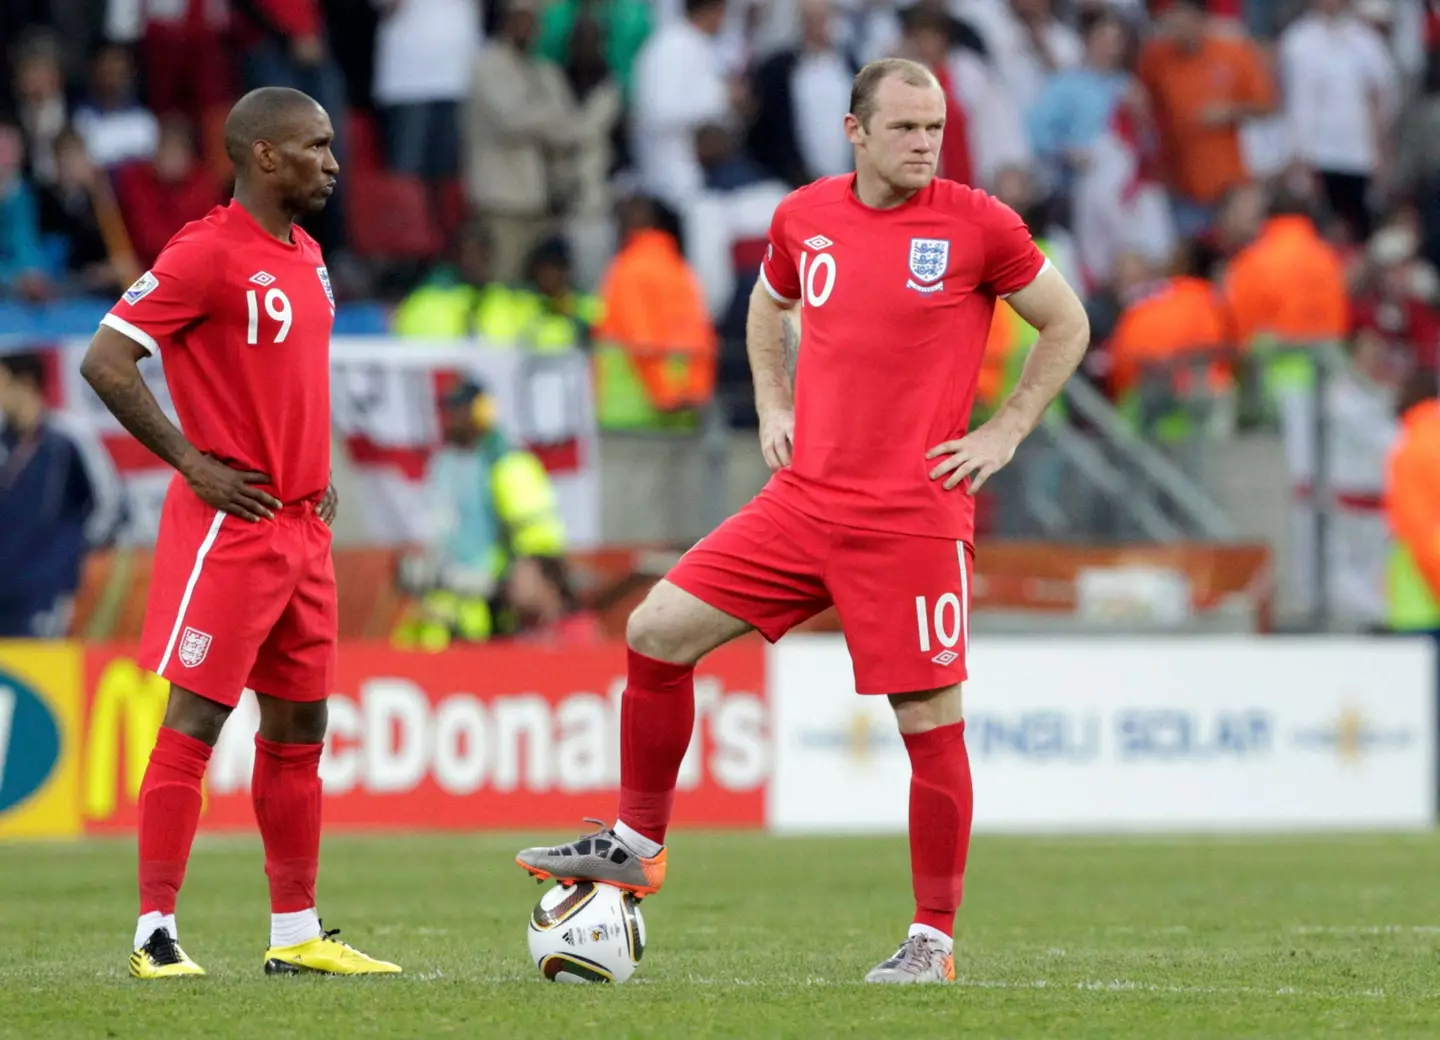 Wayne Rooney and Jermain Defoe in action at the 2010 World Cup (